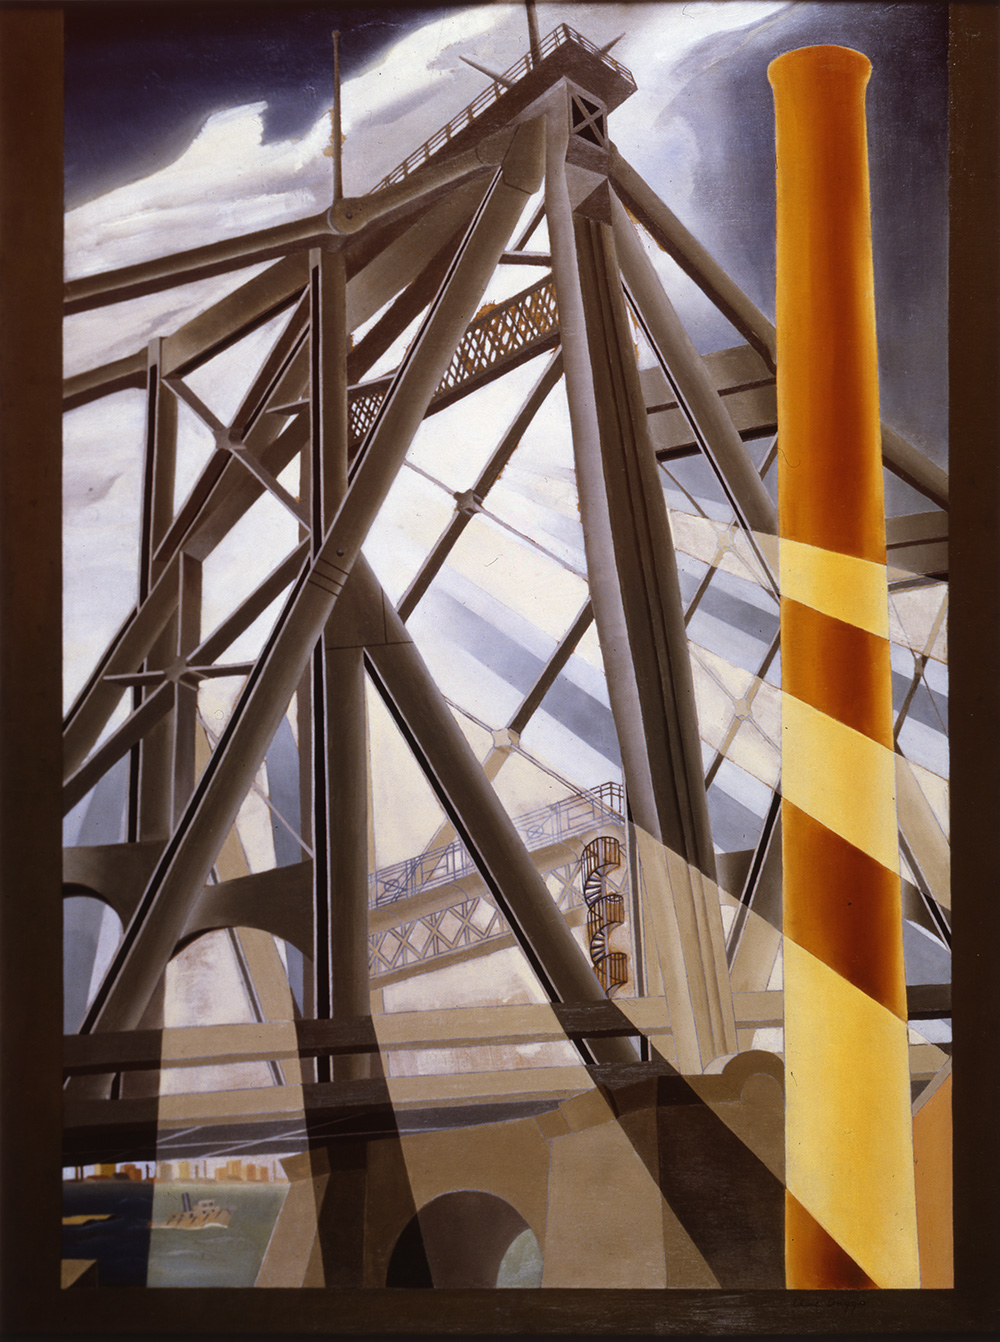 Elsie Driggs, "Queensborough Bridge," 1927. Oil on canvas, 40 1/4 x 30 1/4 in. (102.2 x 76.8 cm). Montclair Art Museum, New Jersey, Museum purchase, Lang Acquisition fund, from the estate of Elsie Driggs, 1969.4